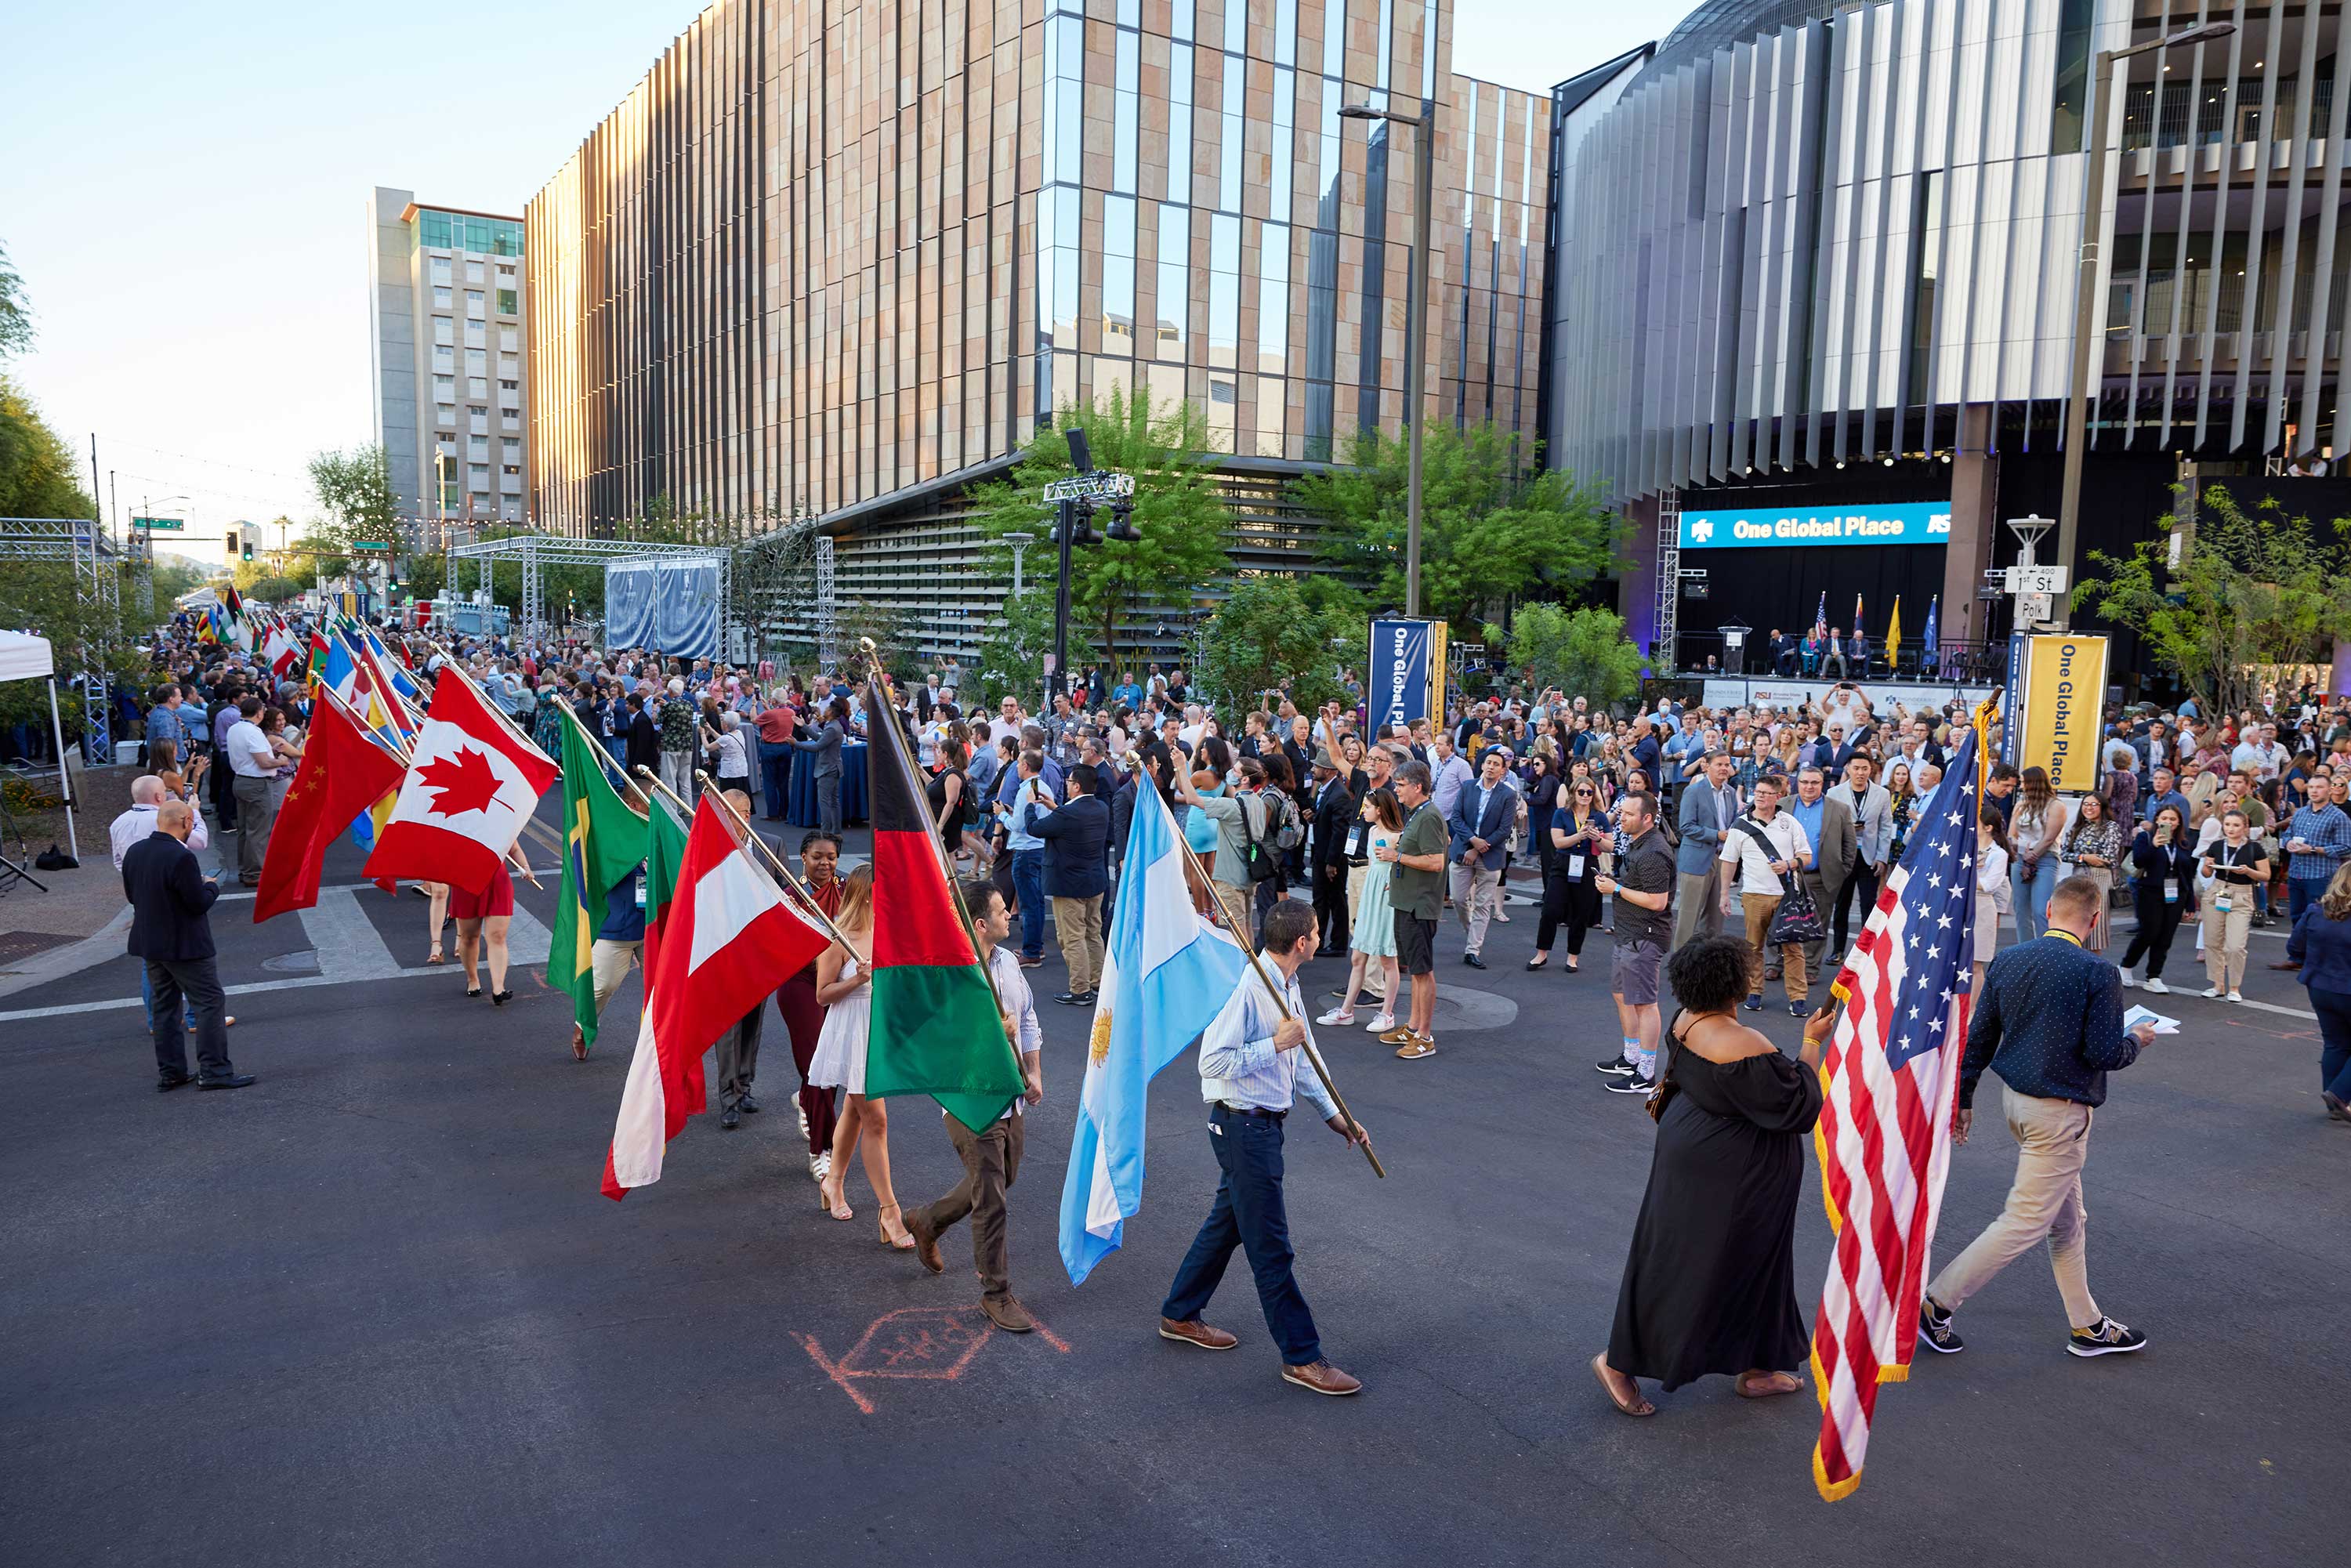 People walking in parade with flags from around the world